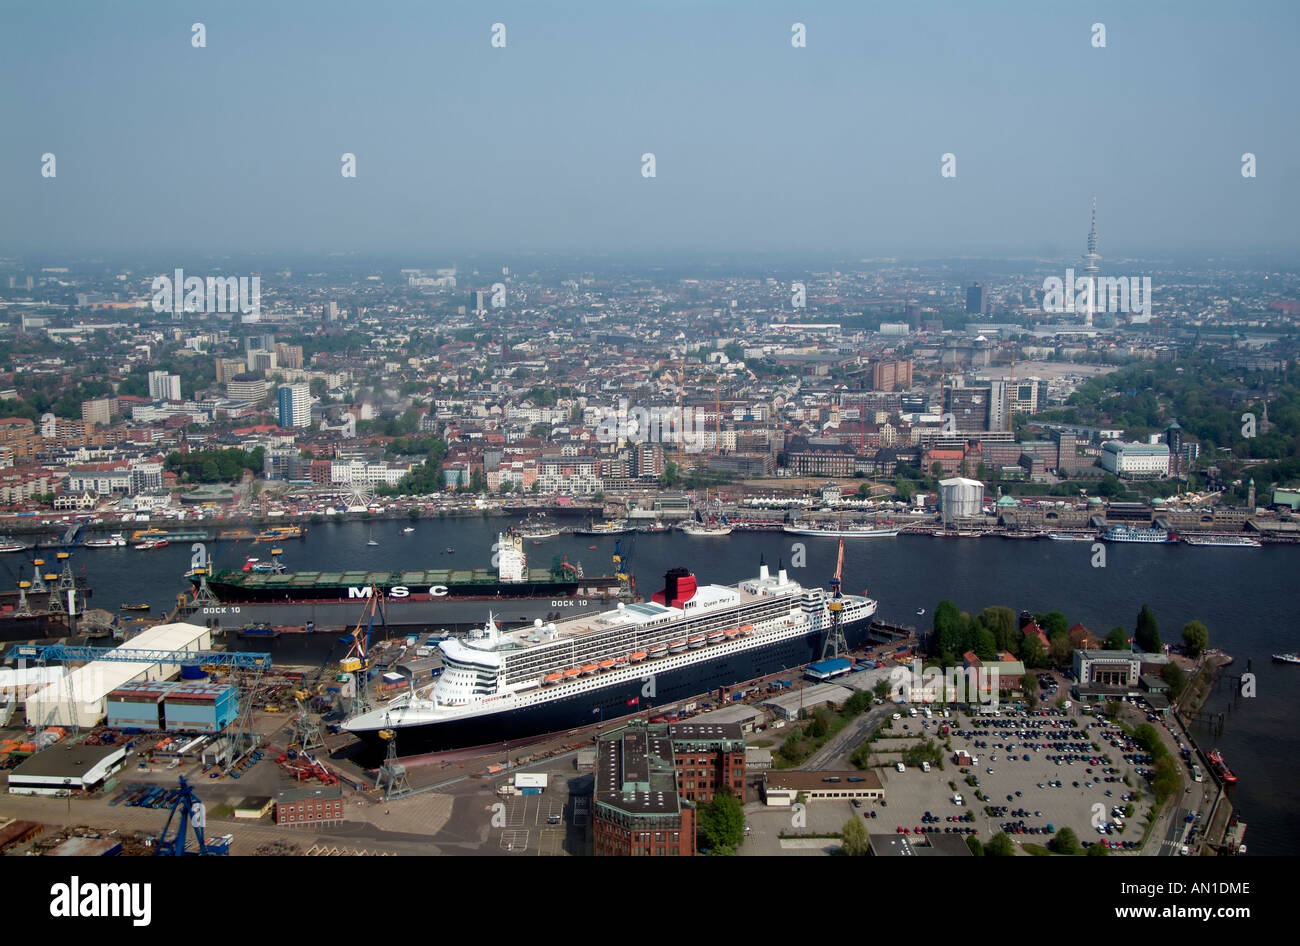 Queen Mary 2 Hamburg Harbour Skyview from a helicopter Stock Photo